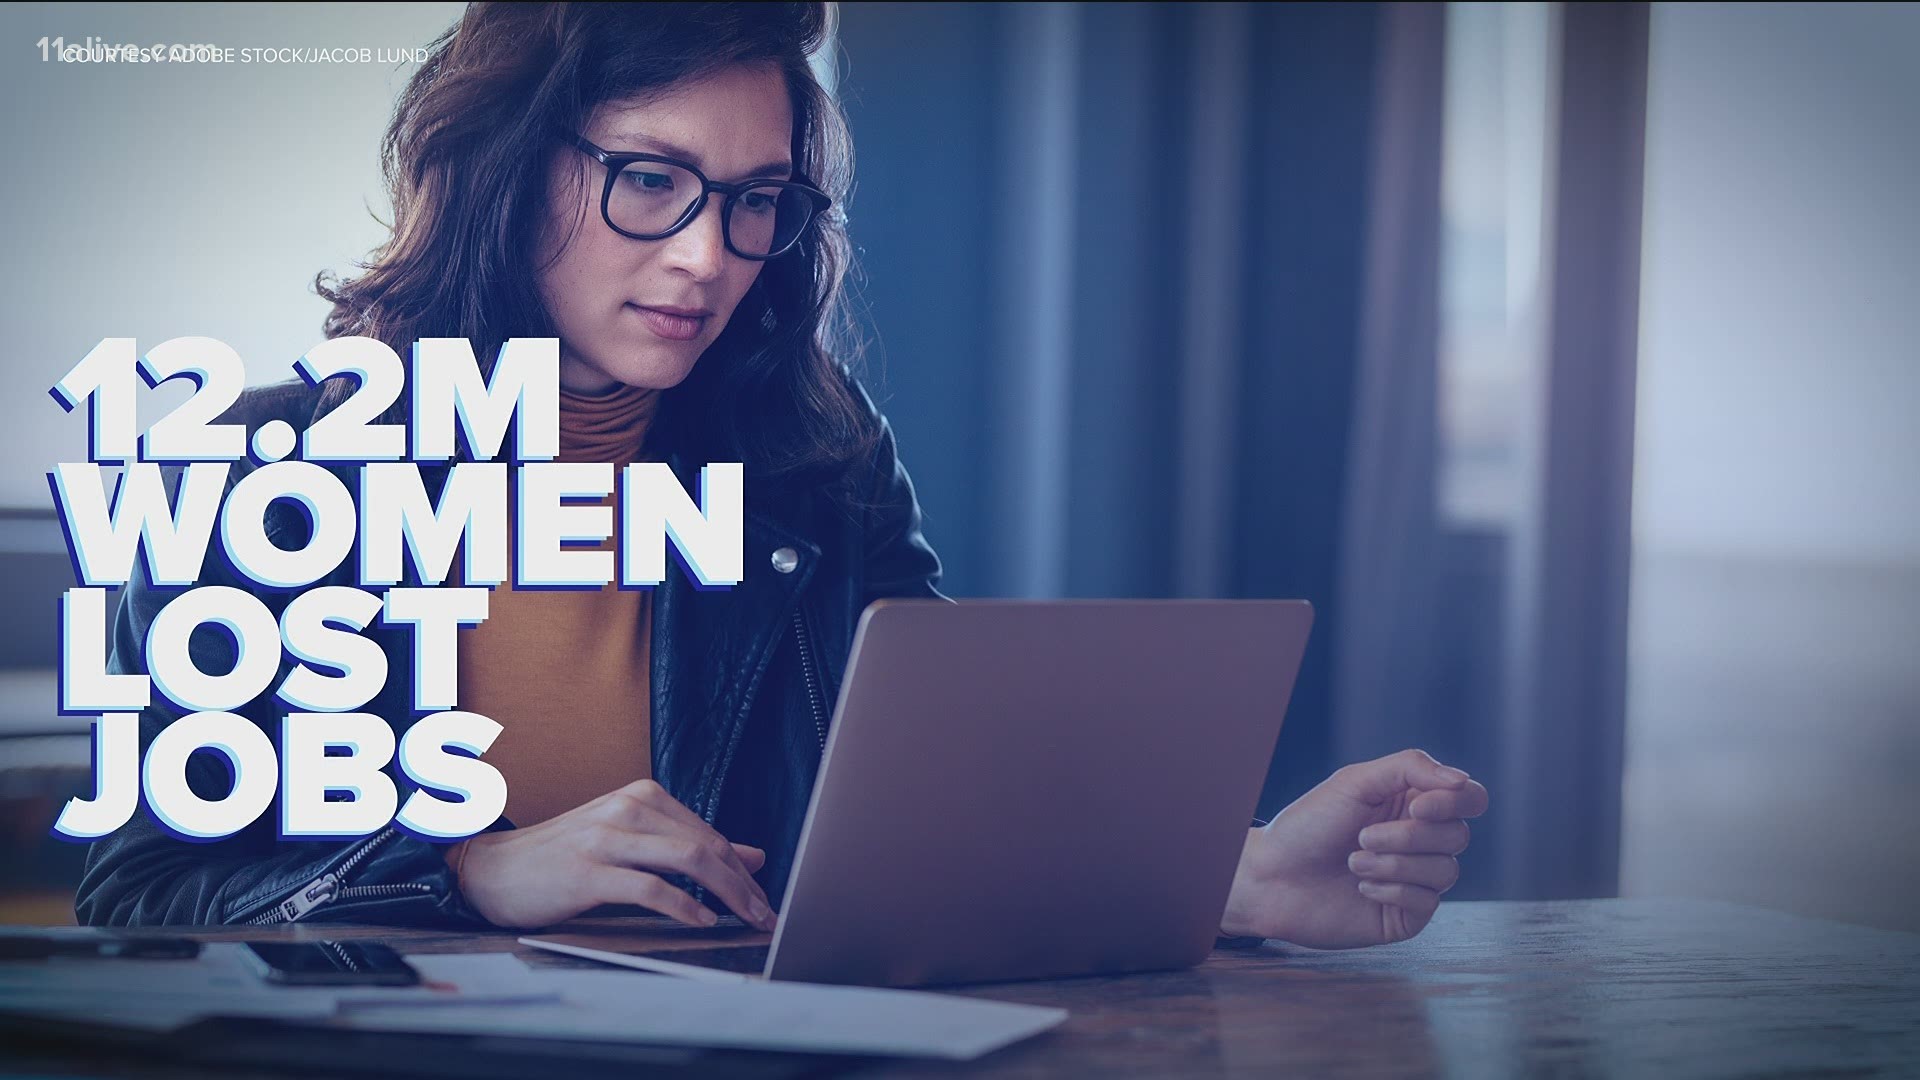 It's the highest job loss for women since the 1980s.